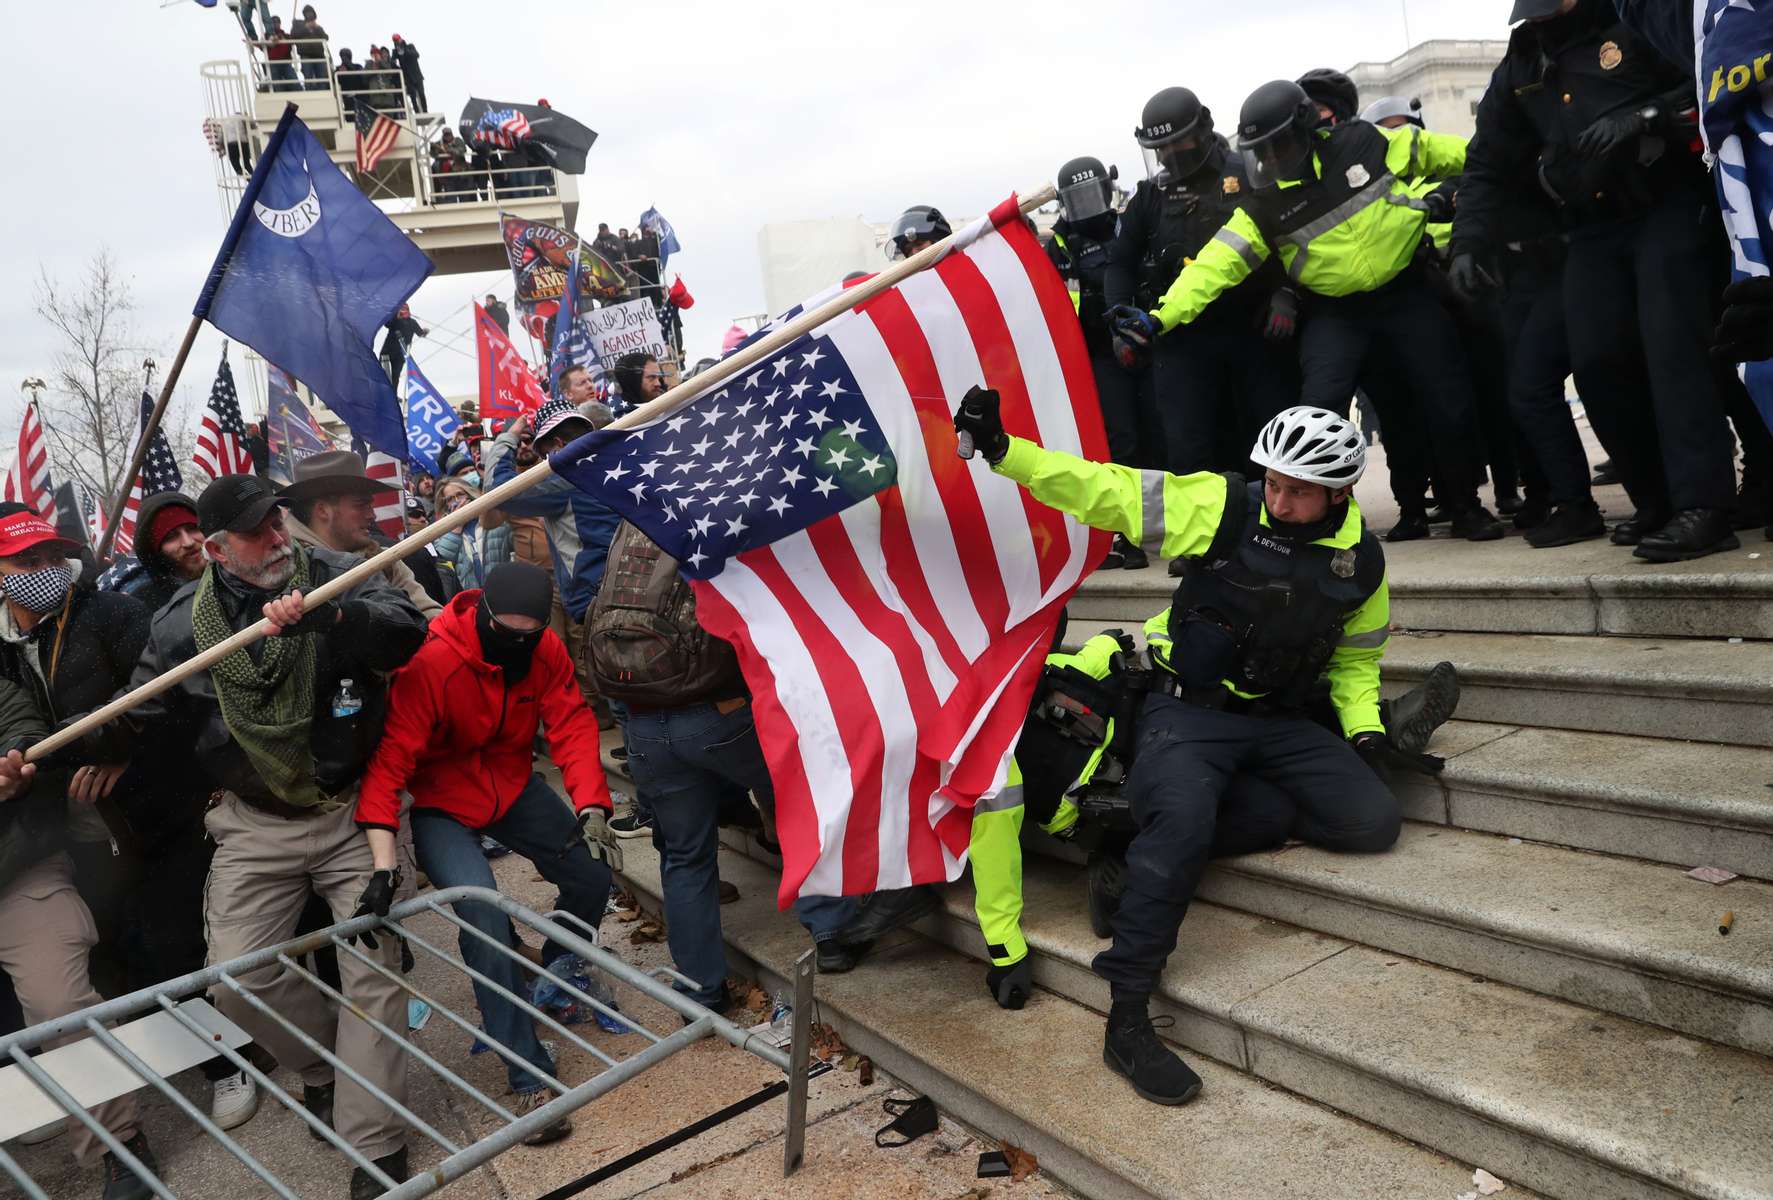 A police officer sprays chemical irritant as he tries to fend off attacks by a mob, many supporters of U.S. President Donald Trump, after a large crowd began attempting to storm the U.S. Capitol building as the U.S. Congress certification of the November 2020 election results went on inside in Washington, U.S., January 6, 2021.